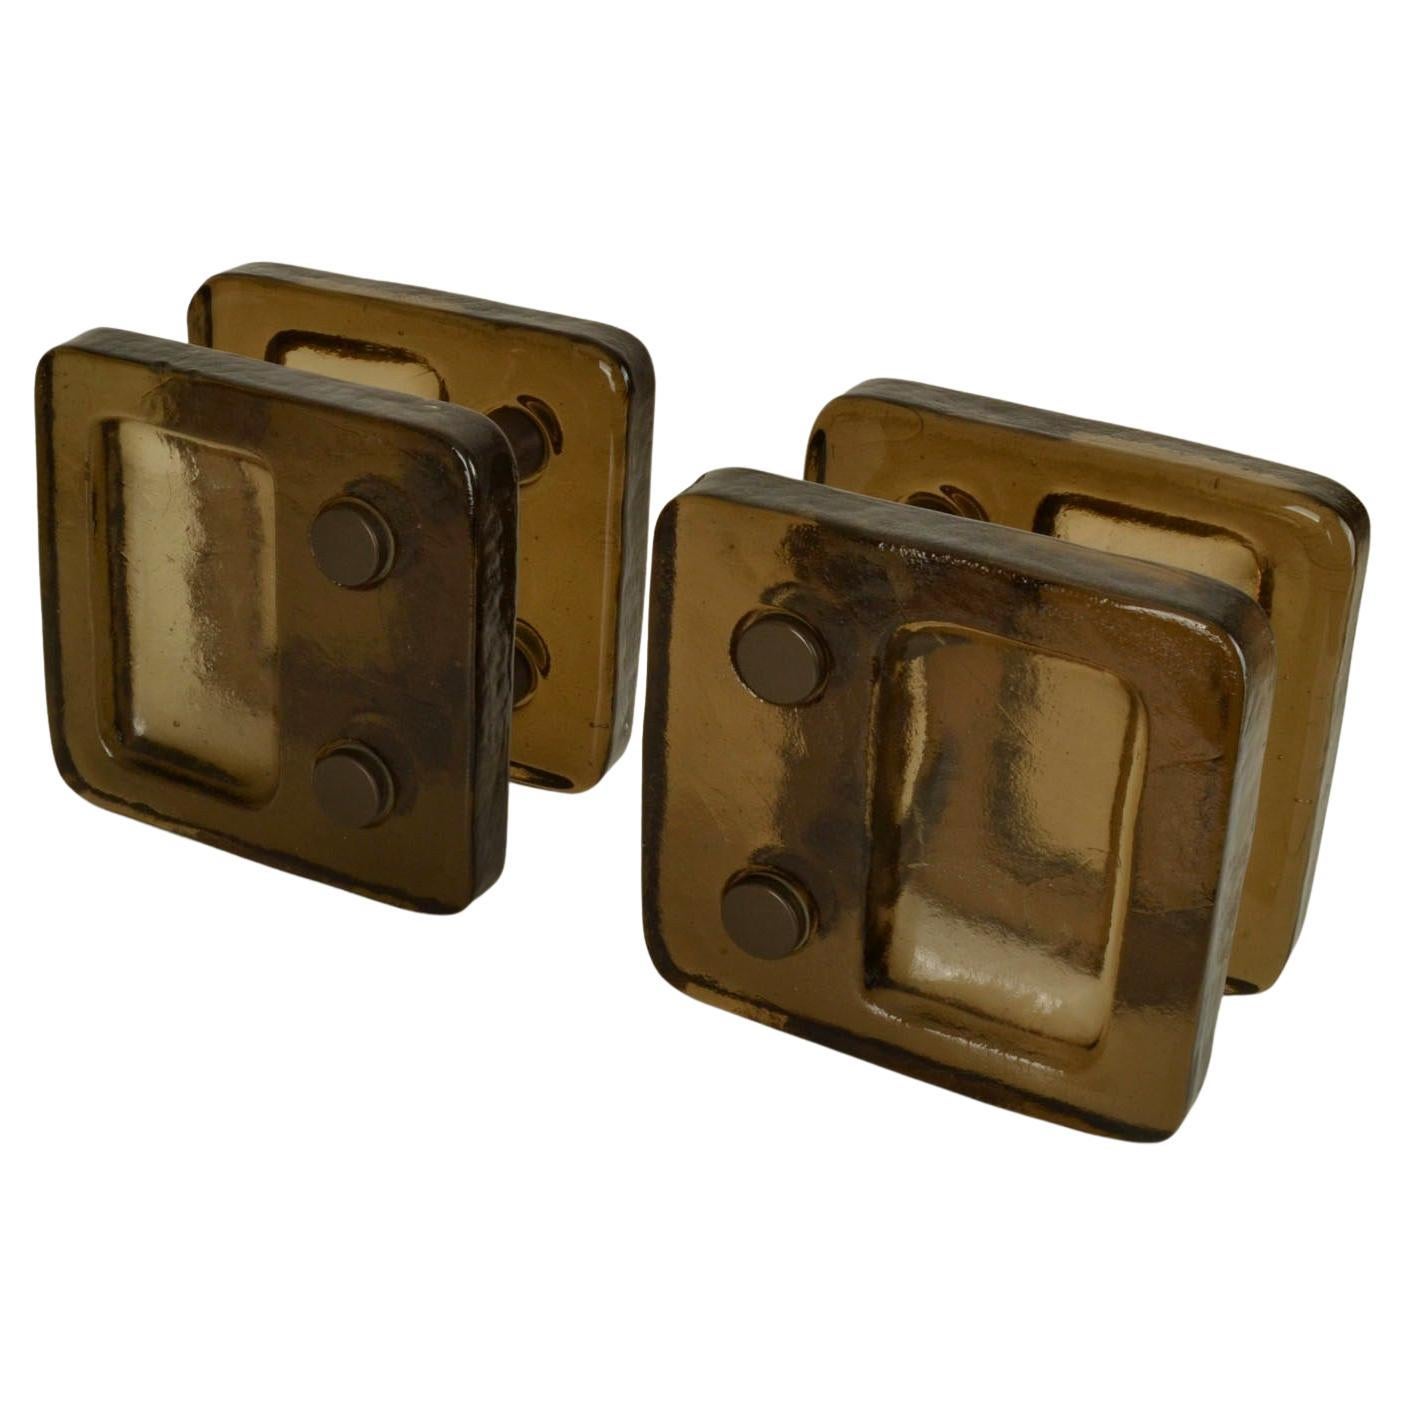 Pair of caramel brown translucent glass cast square glass push and pull door handles with bronze color fittings designed for double doors, 1970's.
The process to cast glass is by directing molten glass into a mold where it solidifies. Ancient